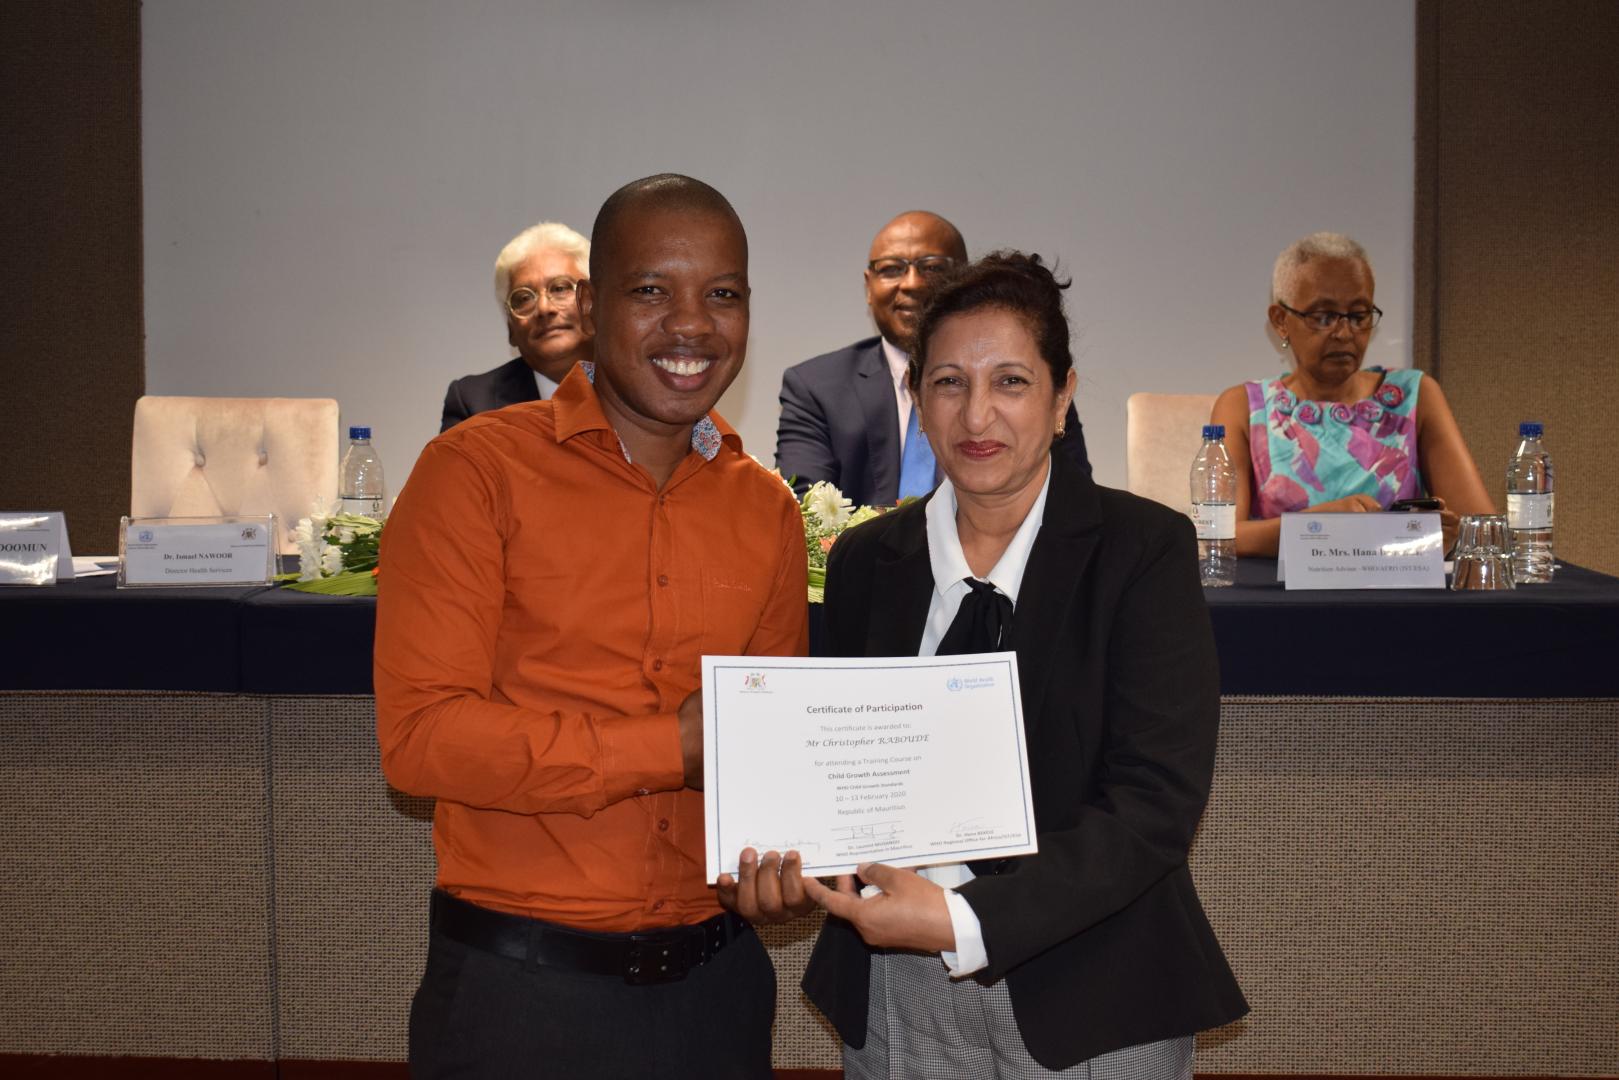 Mr Christopher Raboude, Nutritionist, Rodrigues Island, receiving the Certificate of Participation from Mrs Aryamah Doomun, Chief Nutritionist.  In the background, Dr I. Nawoor, Ag Director Health Services, Dr L. Musango, WHO Representative in Mauritius and Dr H. Bekele, Nutrition Advisor, WHO IST/ESA